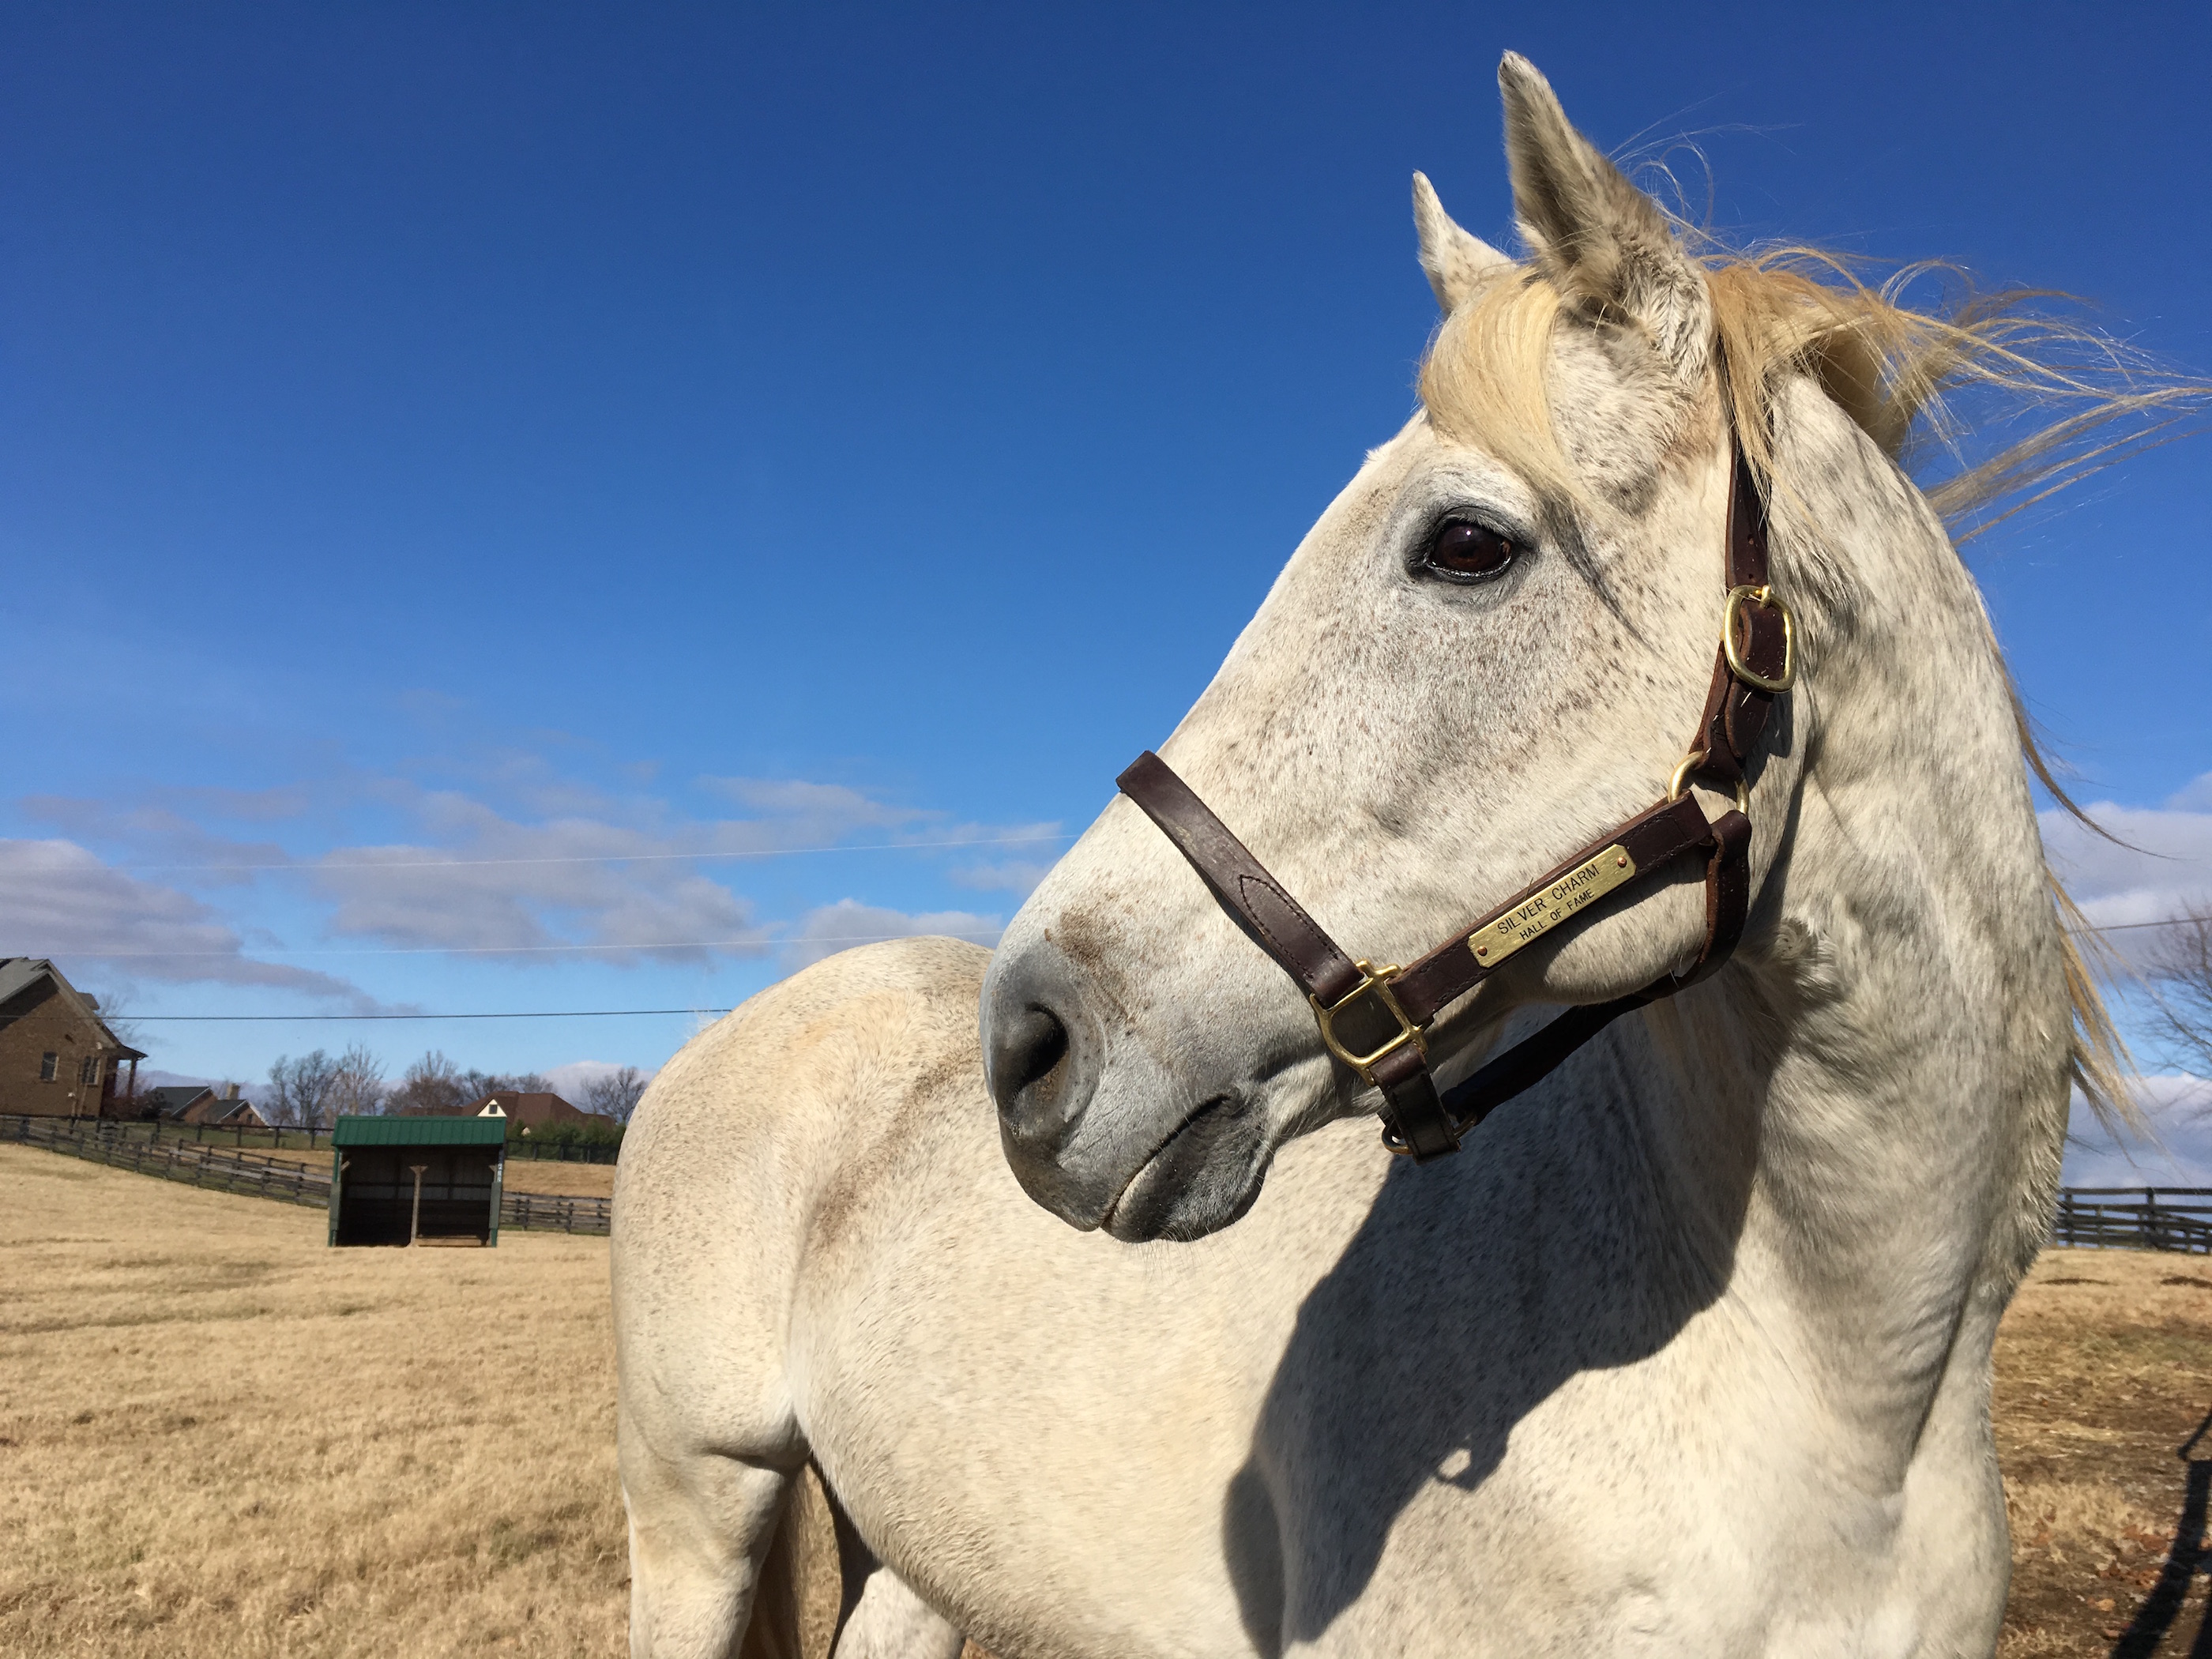 Silver Charm is now an equine ambassador at Old Friends in Kentucky. “We have a lot of stars, but we only really have one superstar, and it’s him,” said Michael Blowen, who founded Old Friends. Photo: Amanda Duckworth